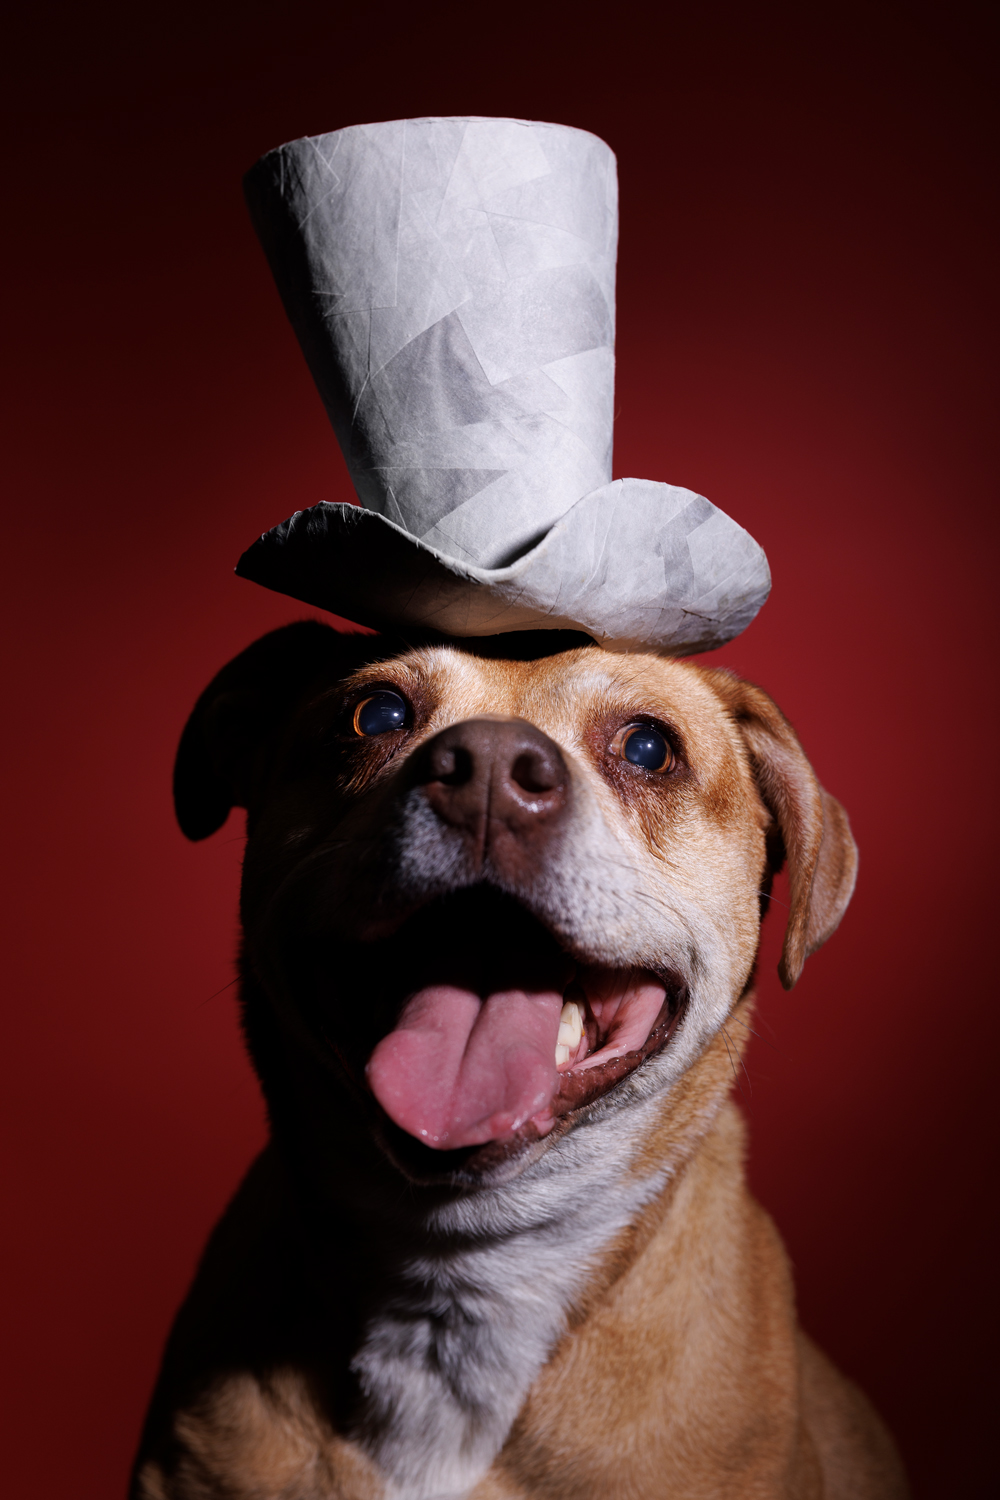 Photo of a fawn colored dog smiling while wearing a white tophat against a red background